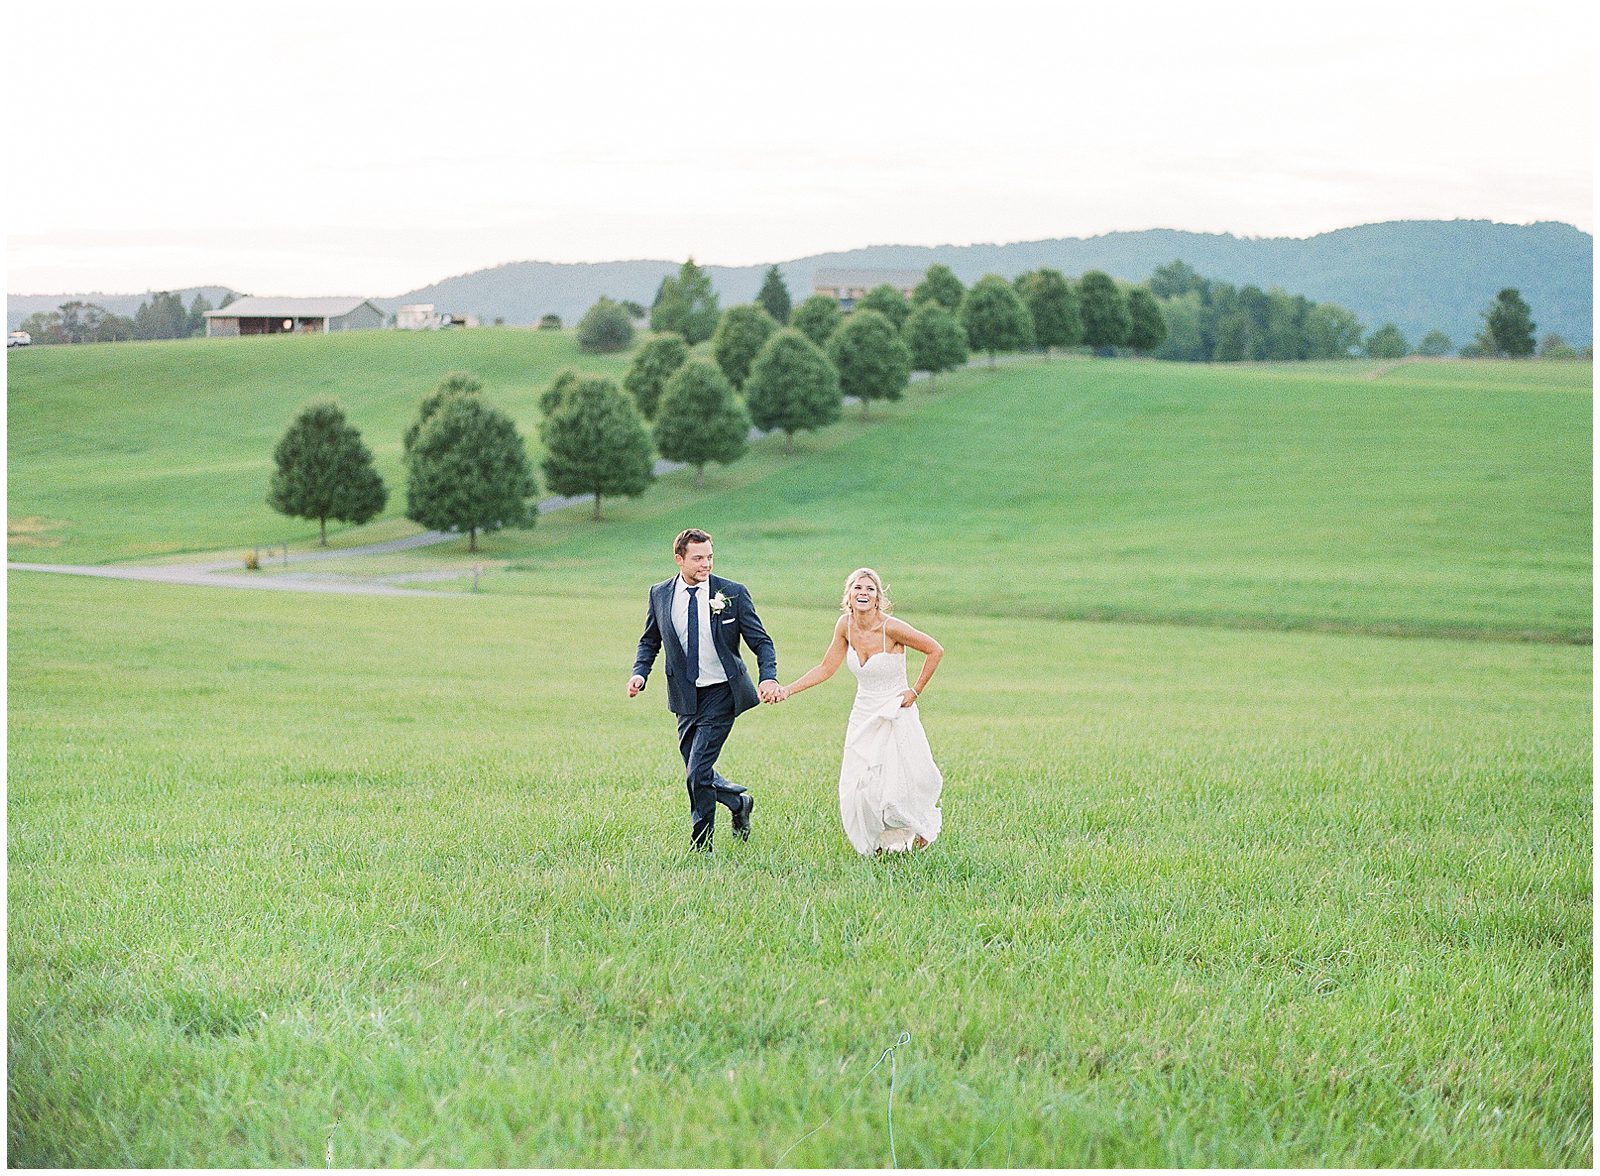 Bride and Groom Running in Field Photo